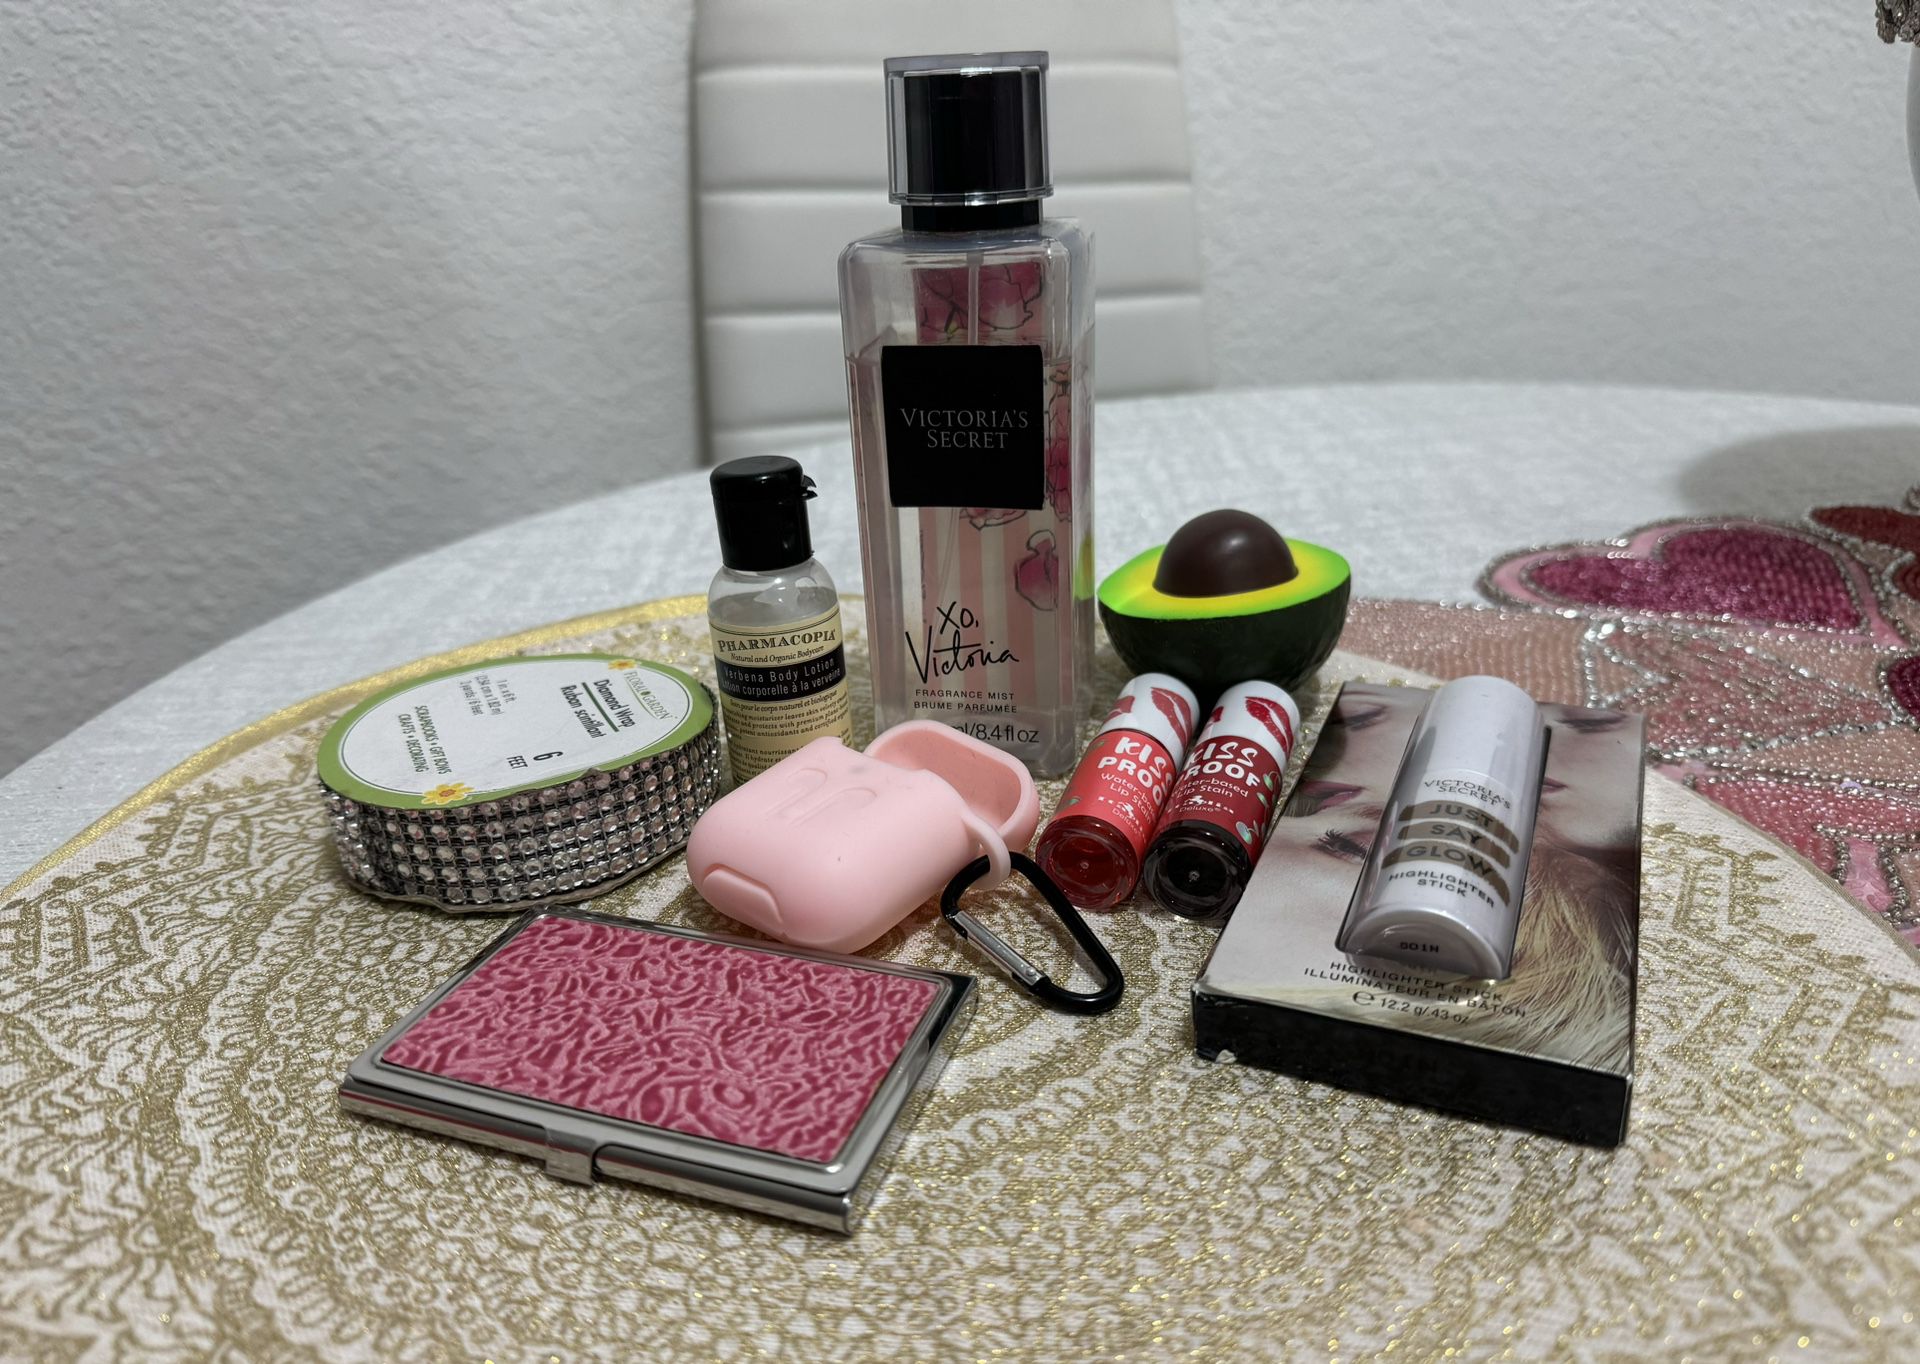 FREE- NEW/USED ITEMS- MAKEUP PICK UP IN KENDALL 